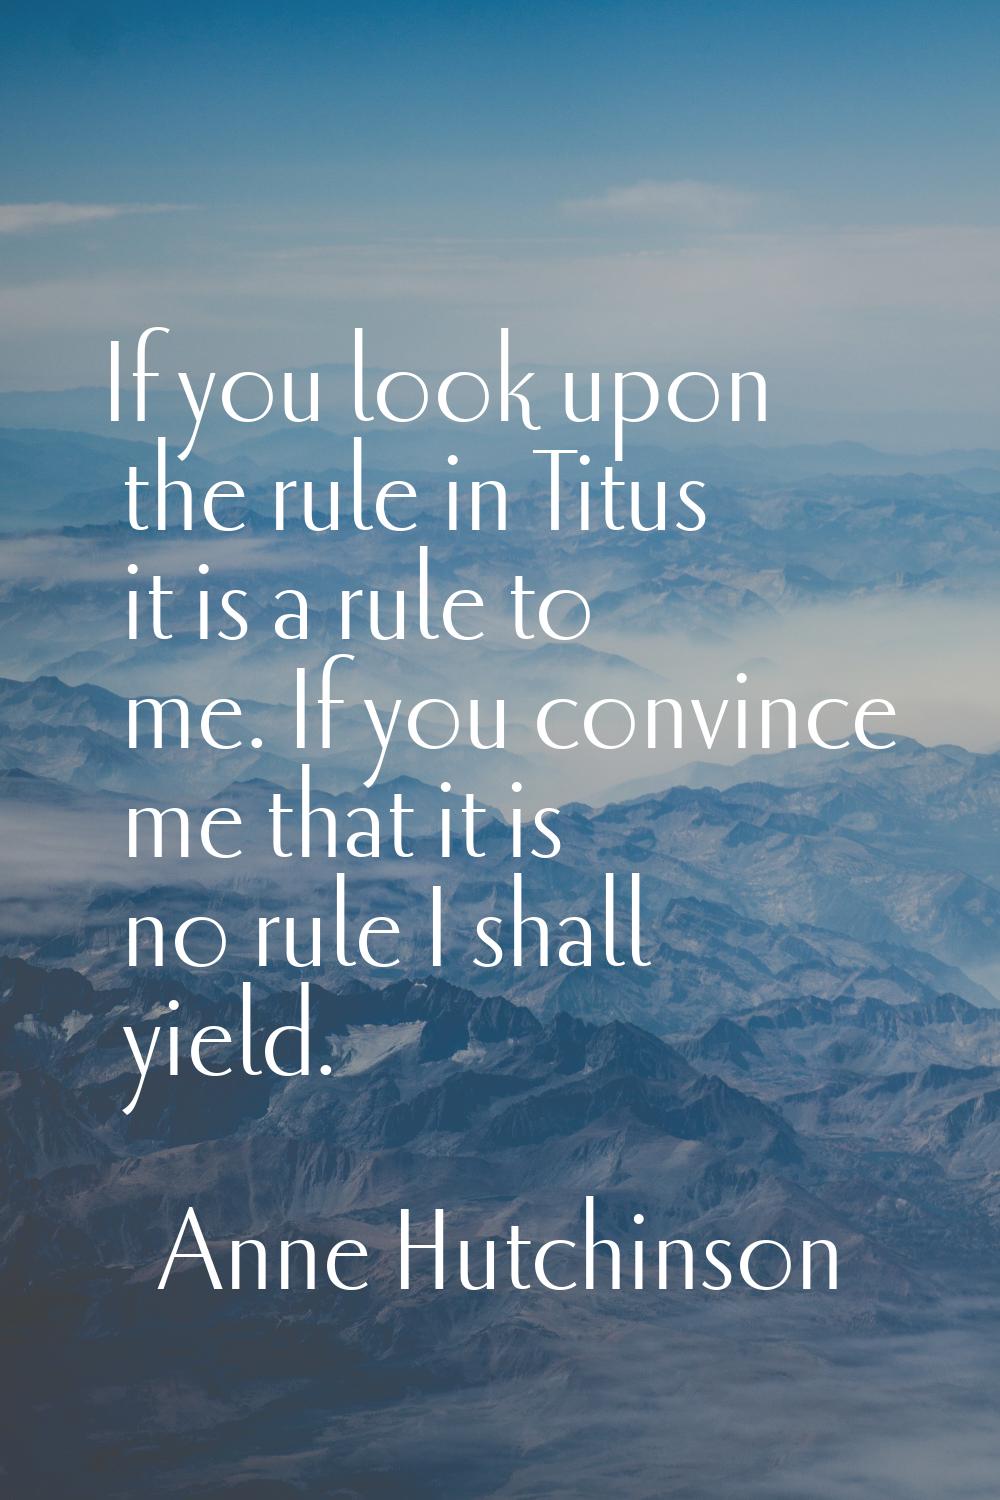 If you look upon the rule in Titus it is a rule to me. If you convince me that it is no rule I shal